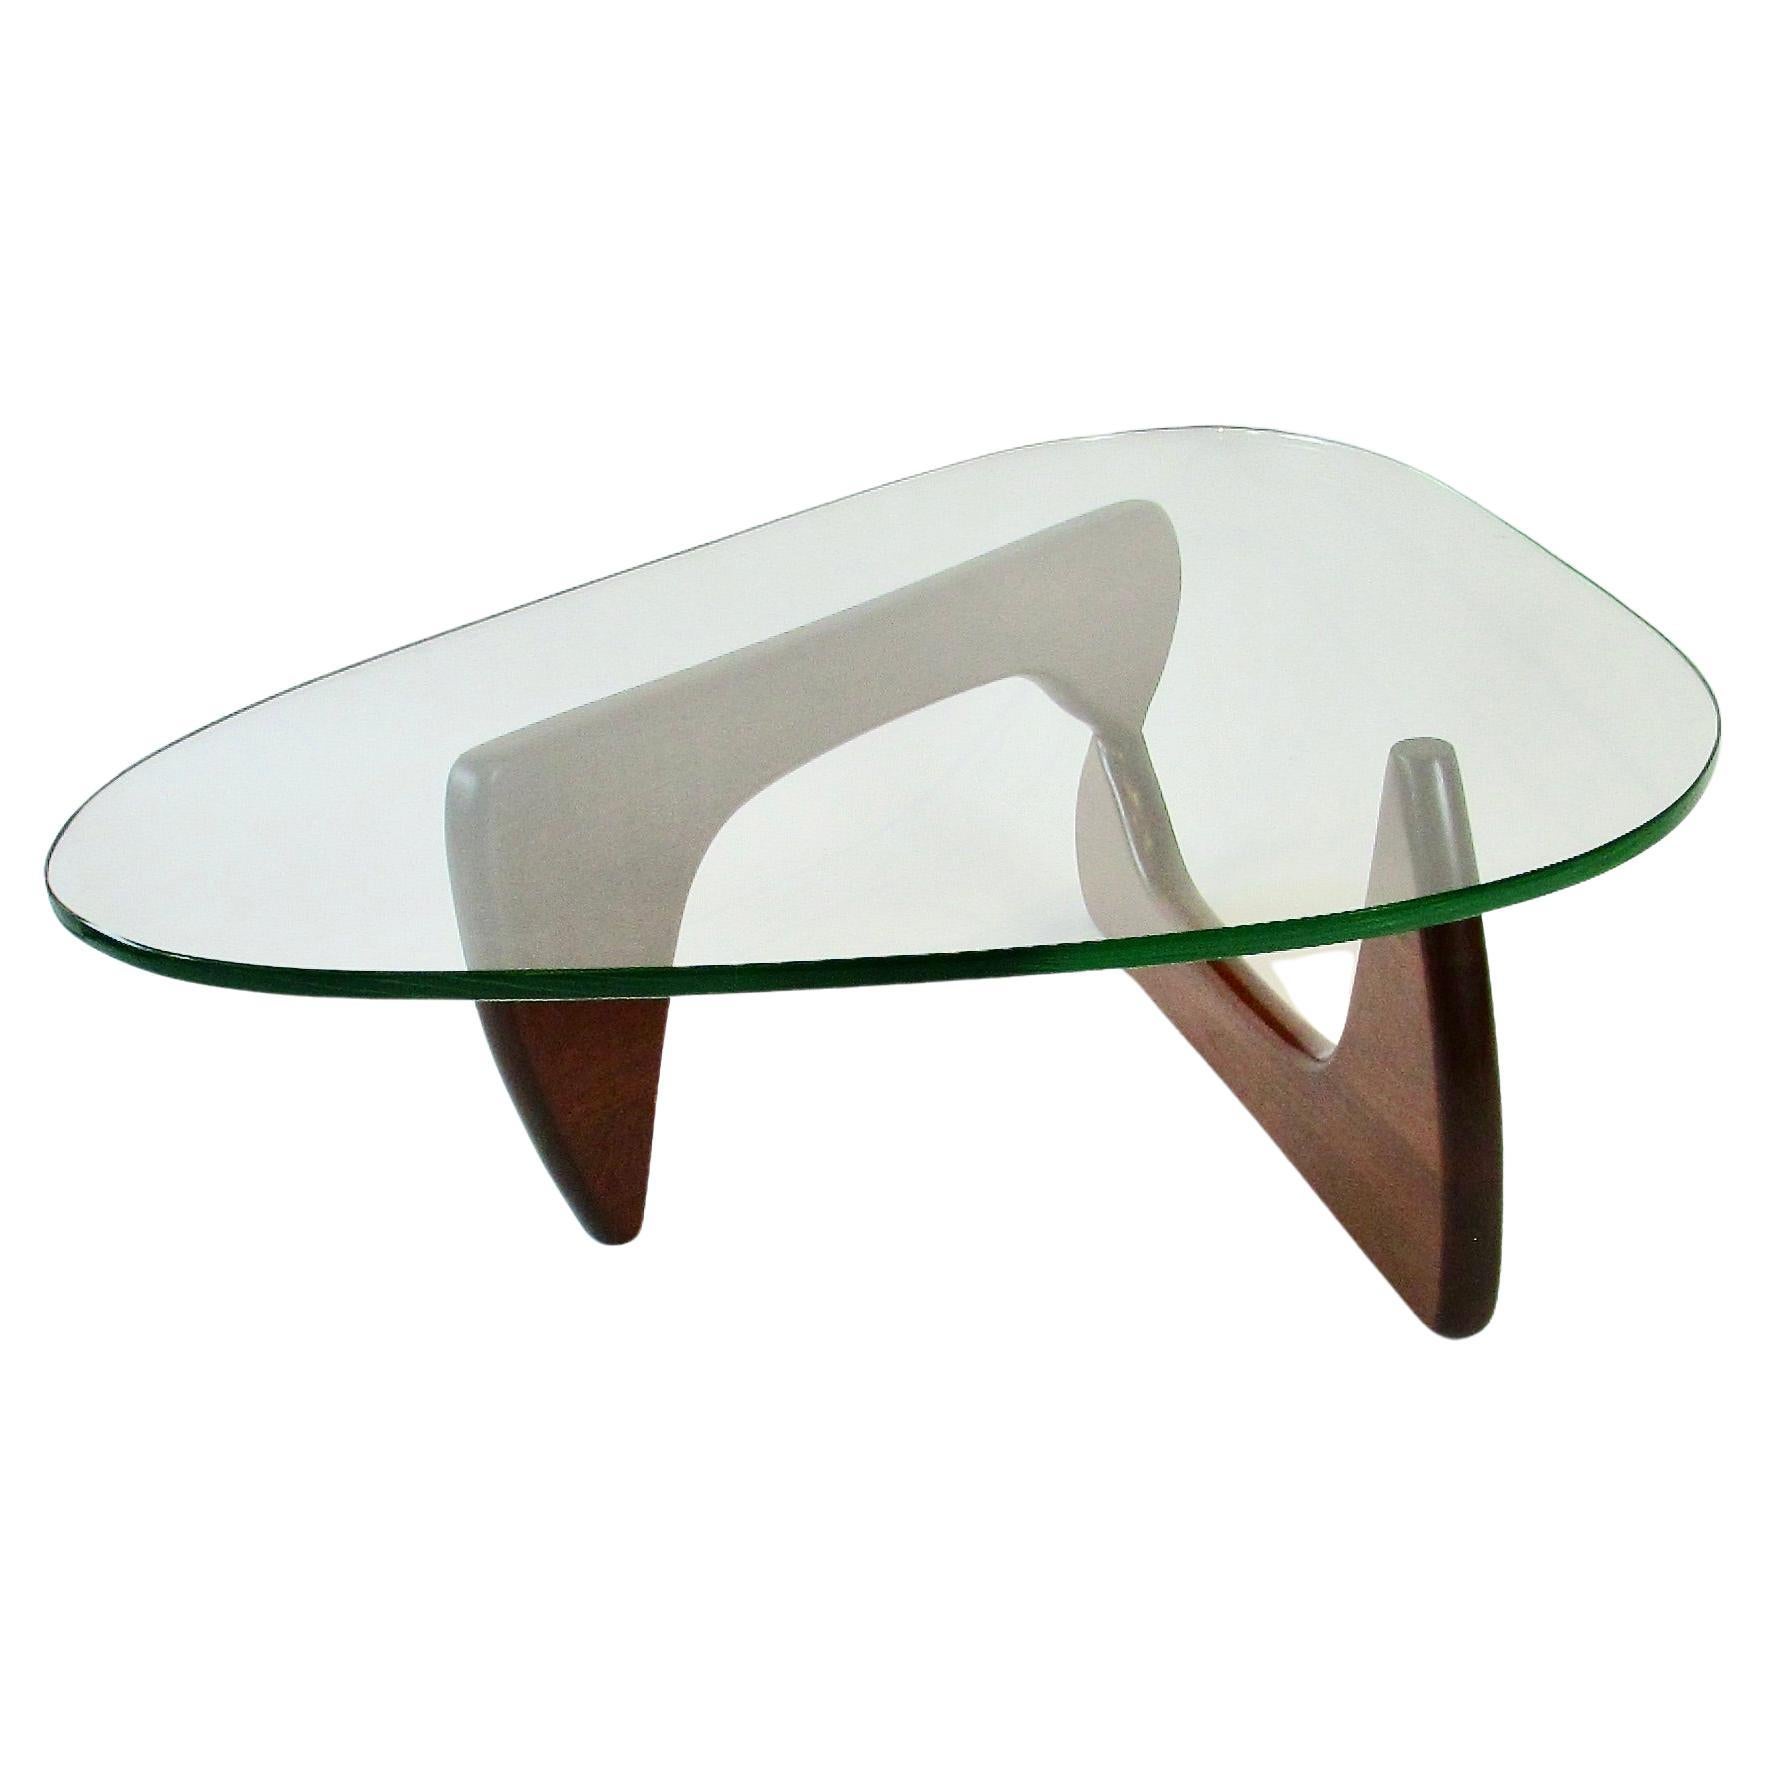 How do I authenticate my Noguchi coffee table?